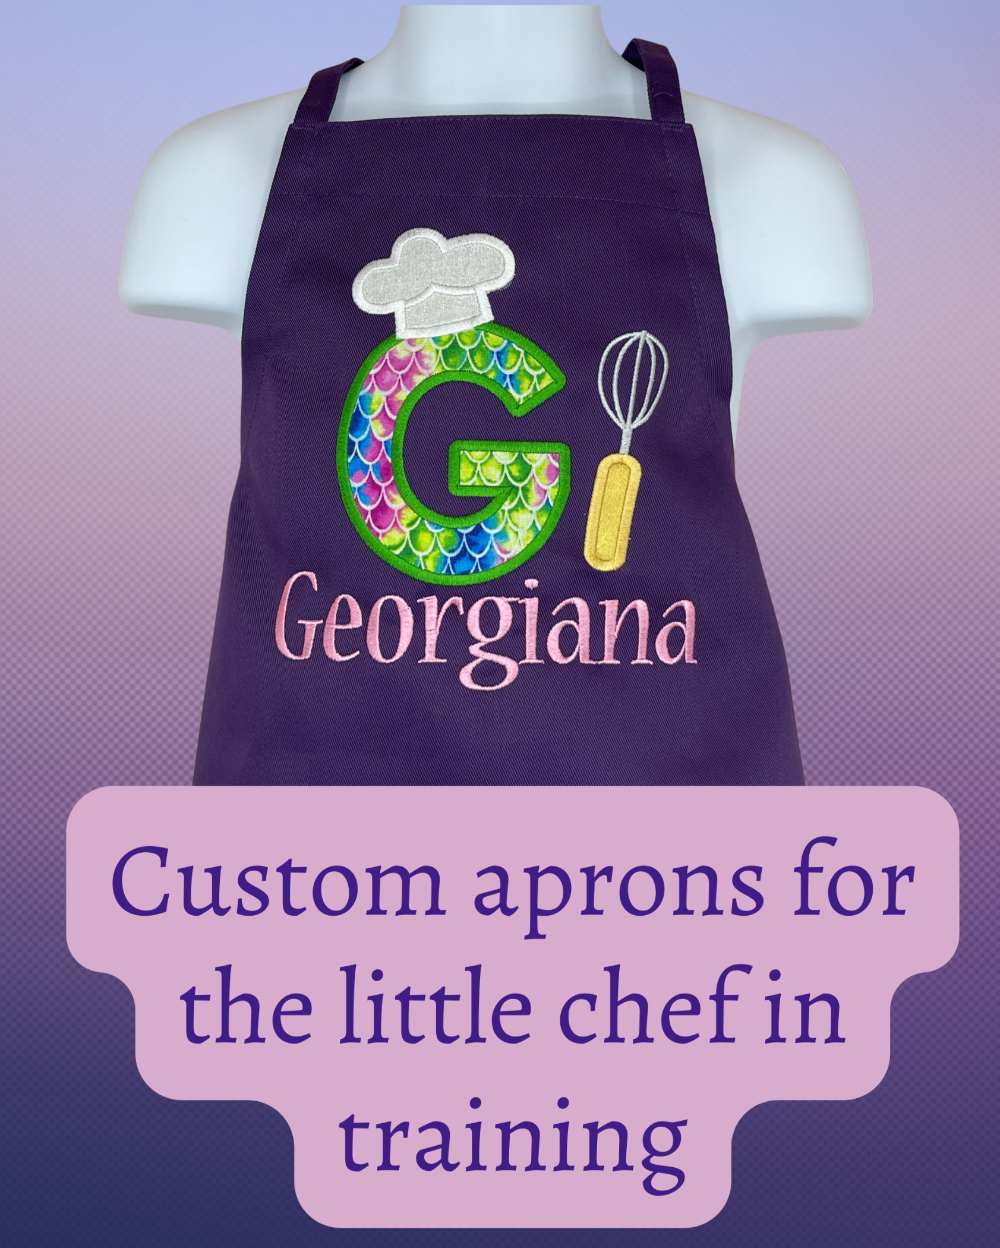 Girls Personalized Embroidered Mermaid Theme Apron with Large Initial & Name